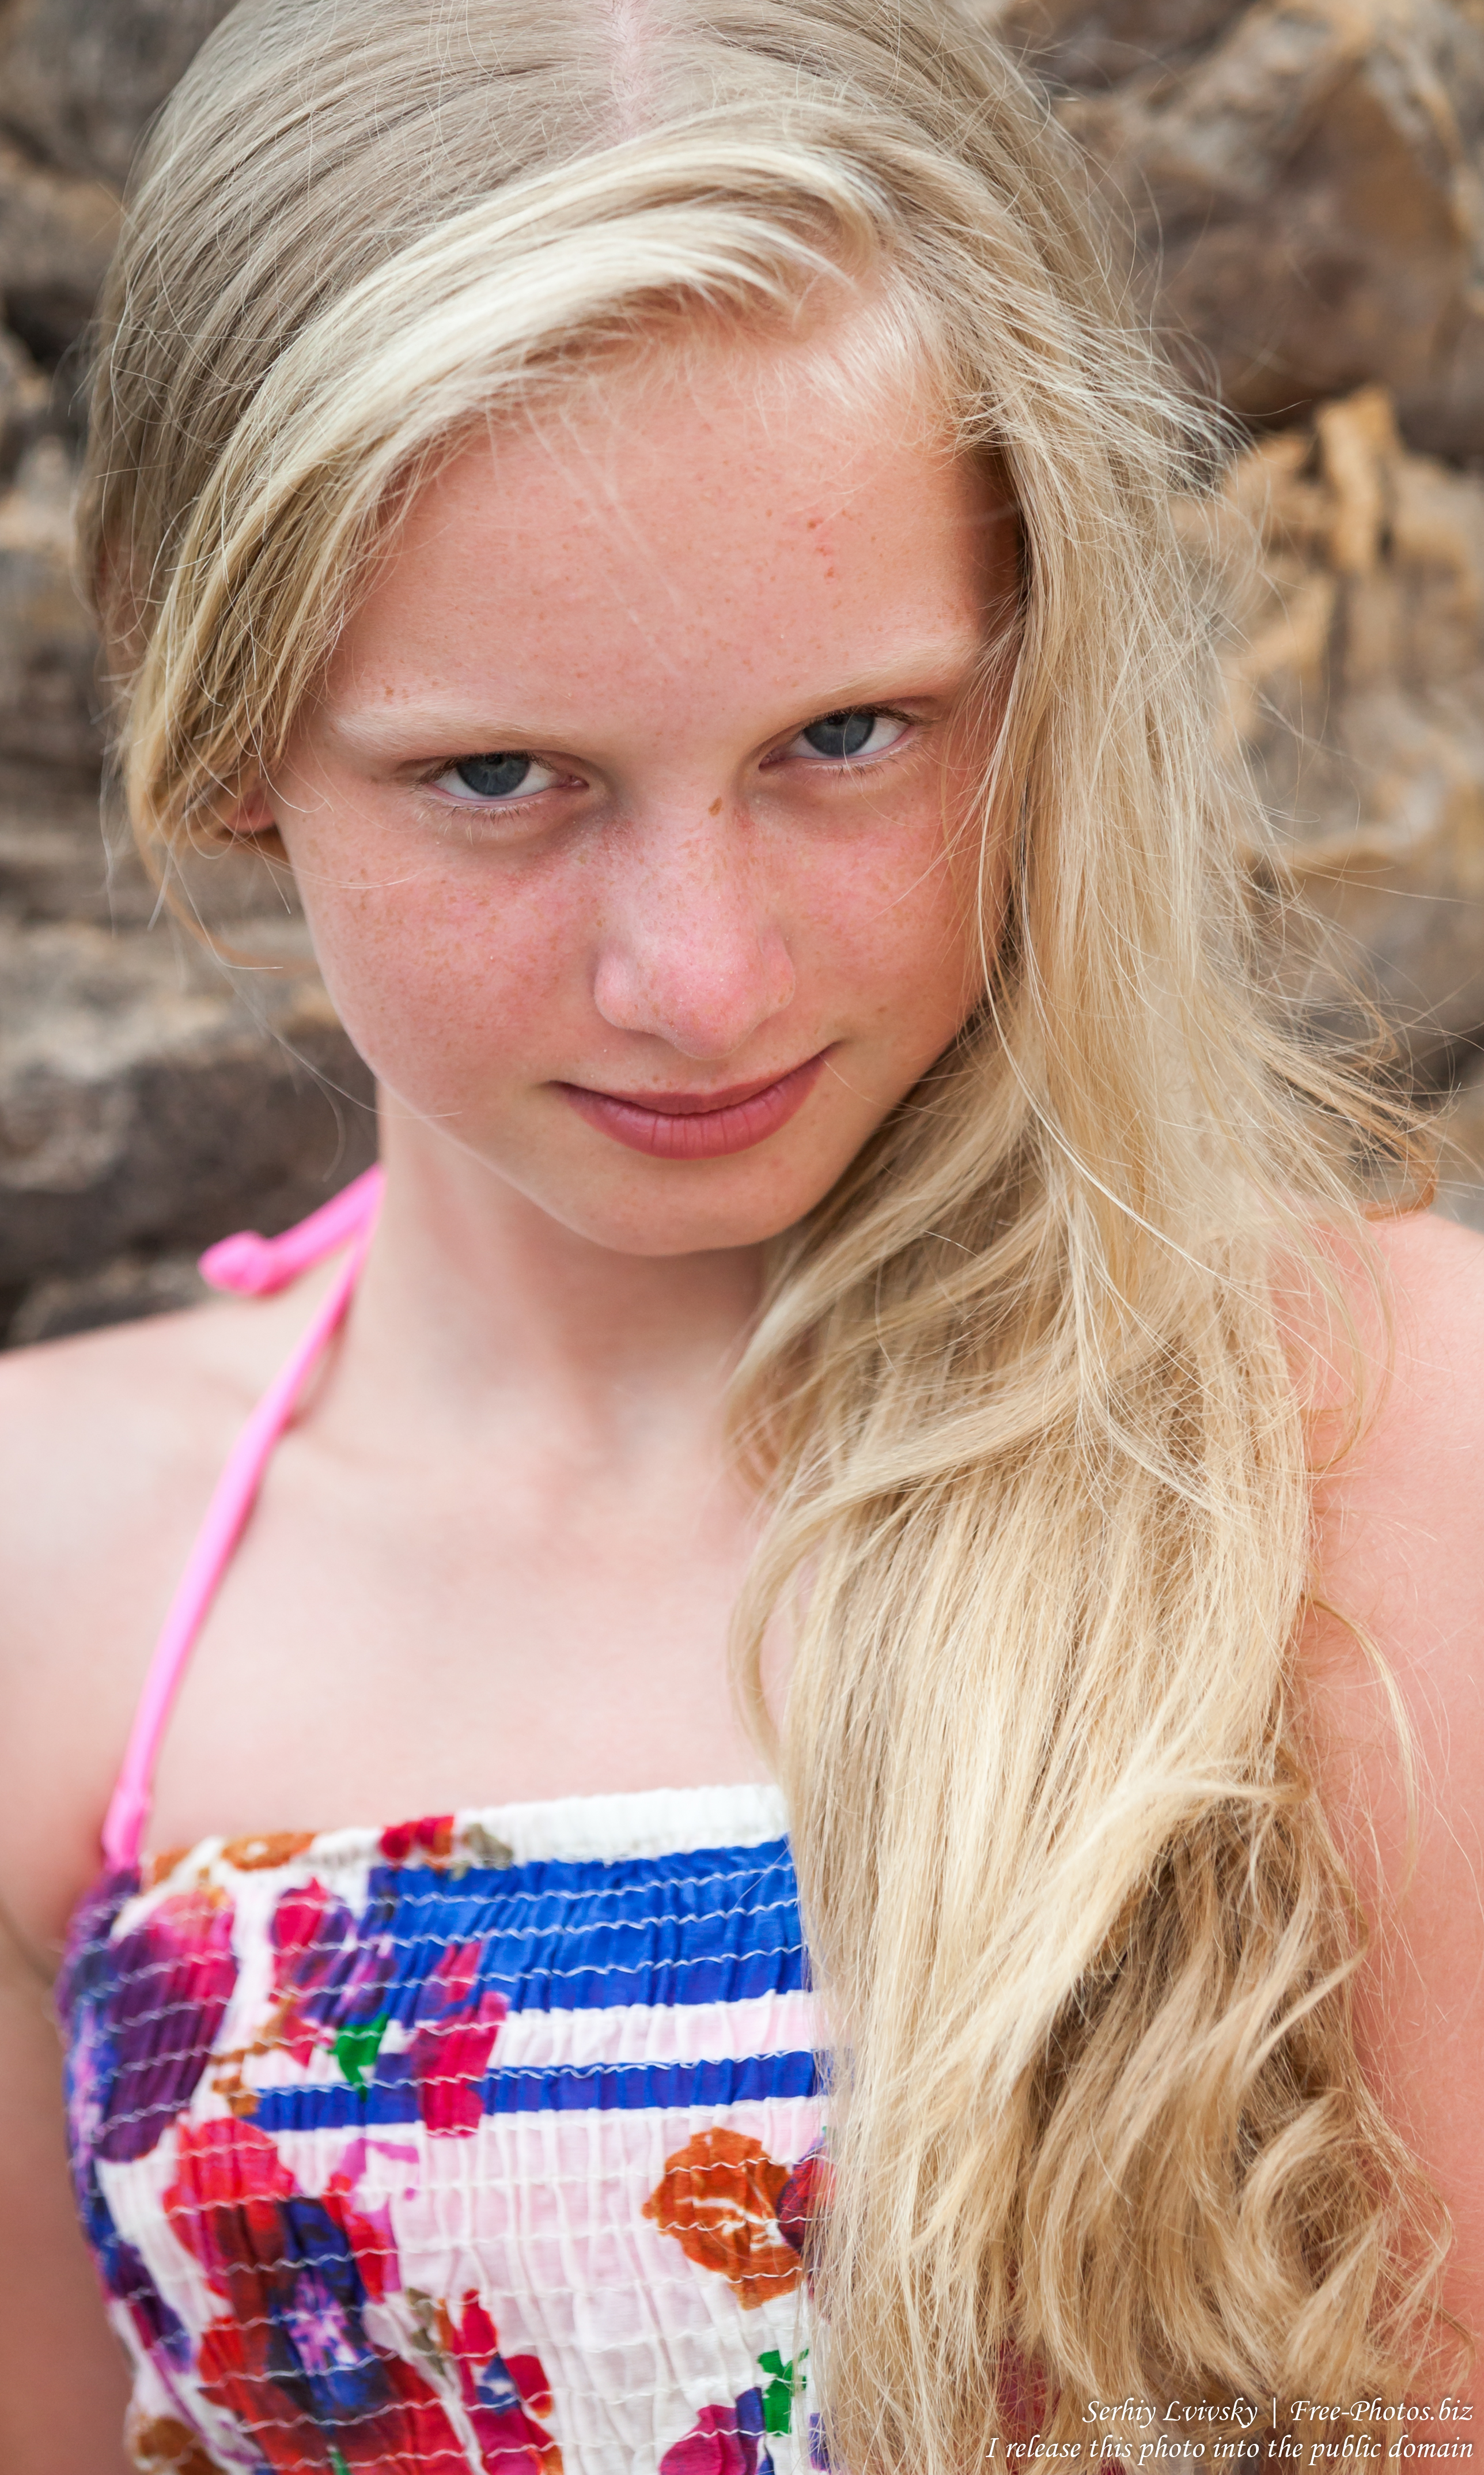 Bozena - an 11-year-old natural blonde Catholic girl photographed by Serhiy Lvivsky in August 2017, picture 5